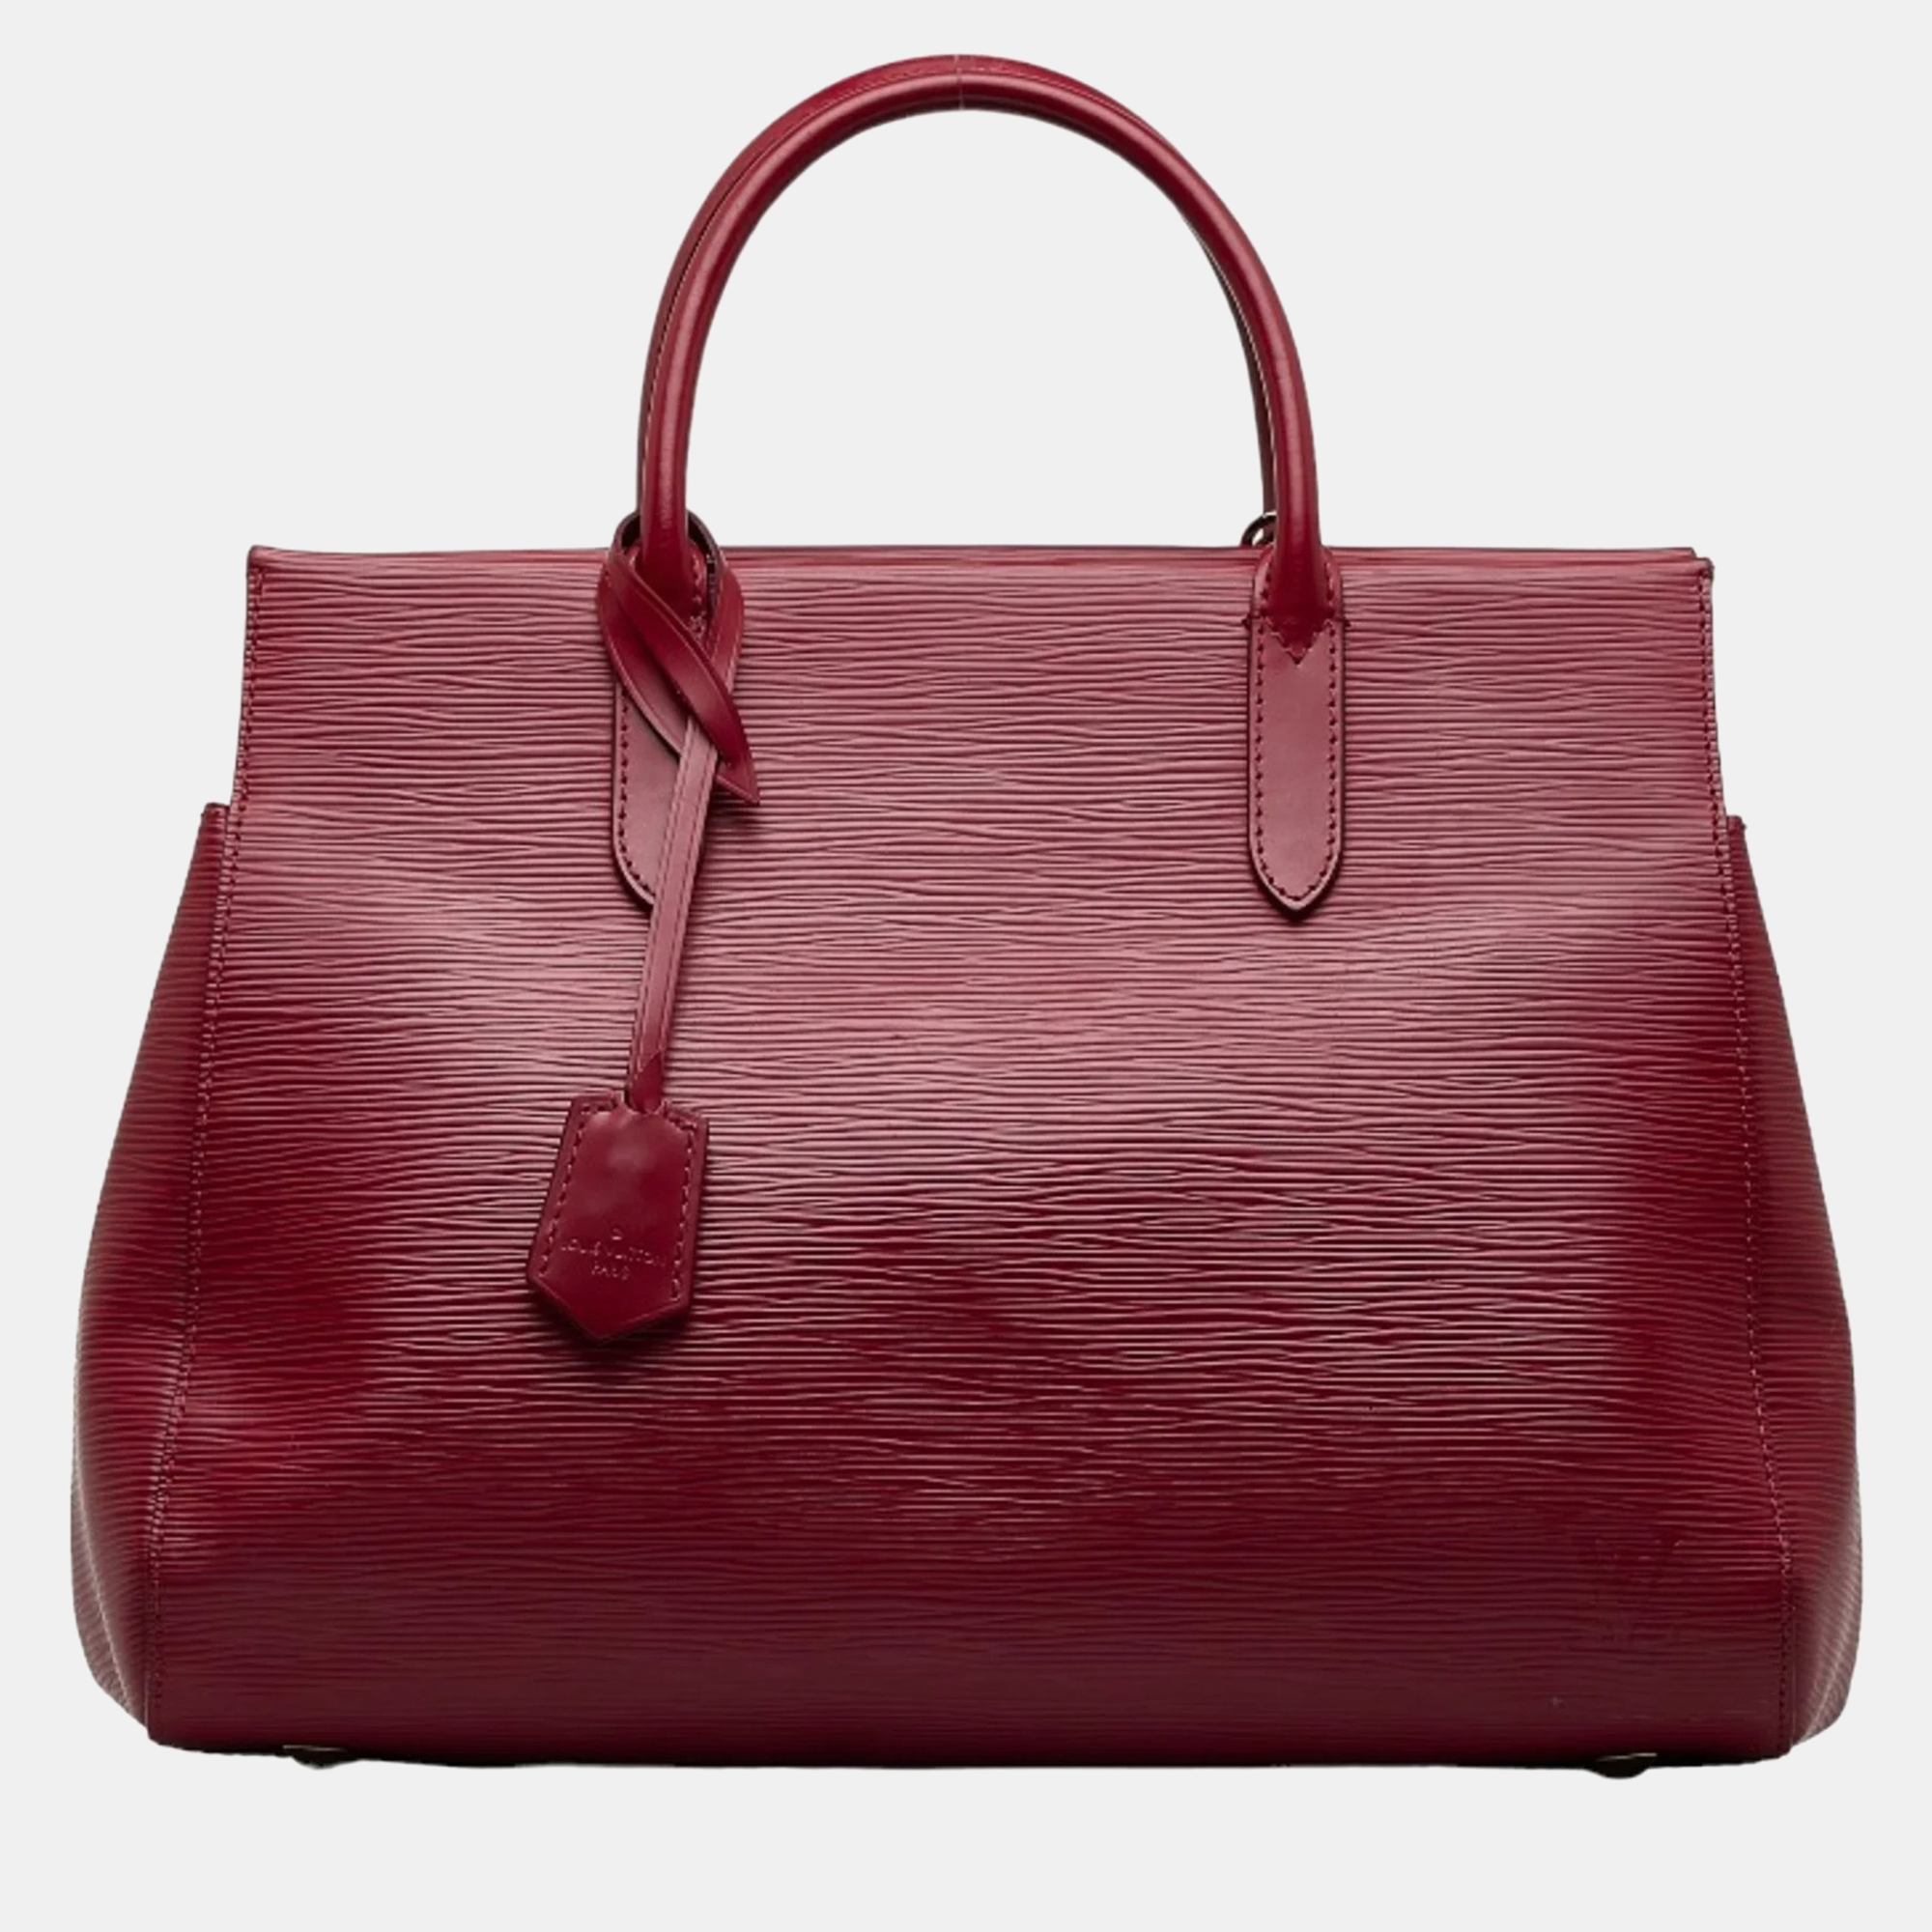 Louis vuitton red epi leather marly mm satchel